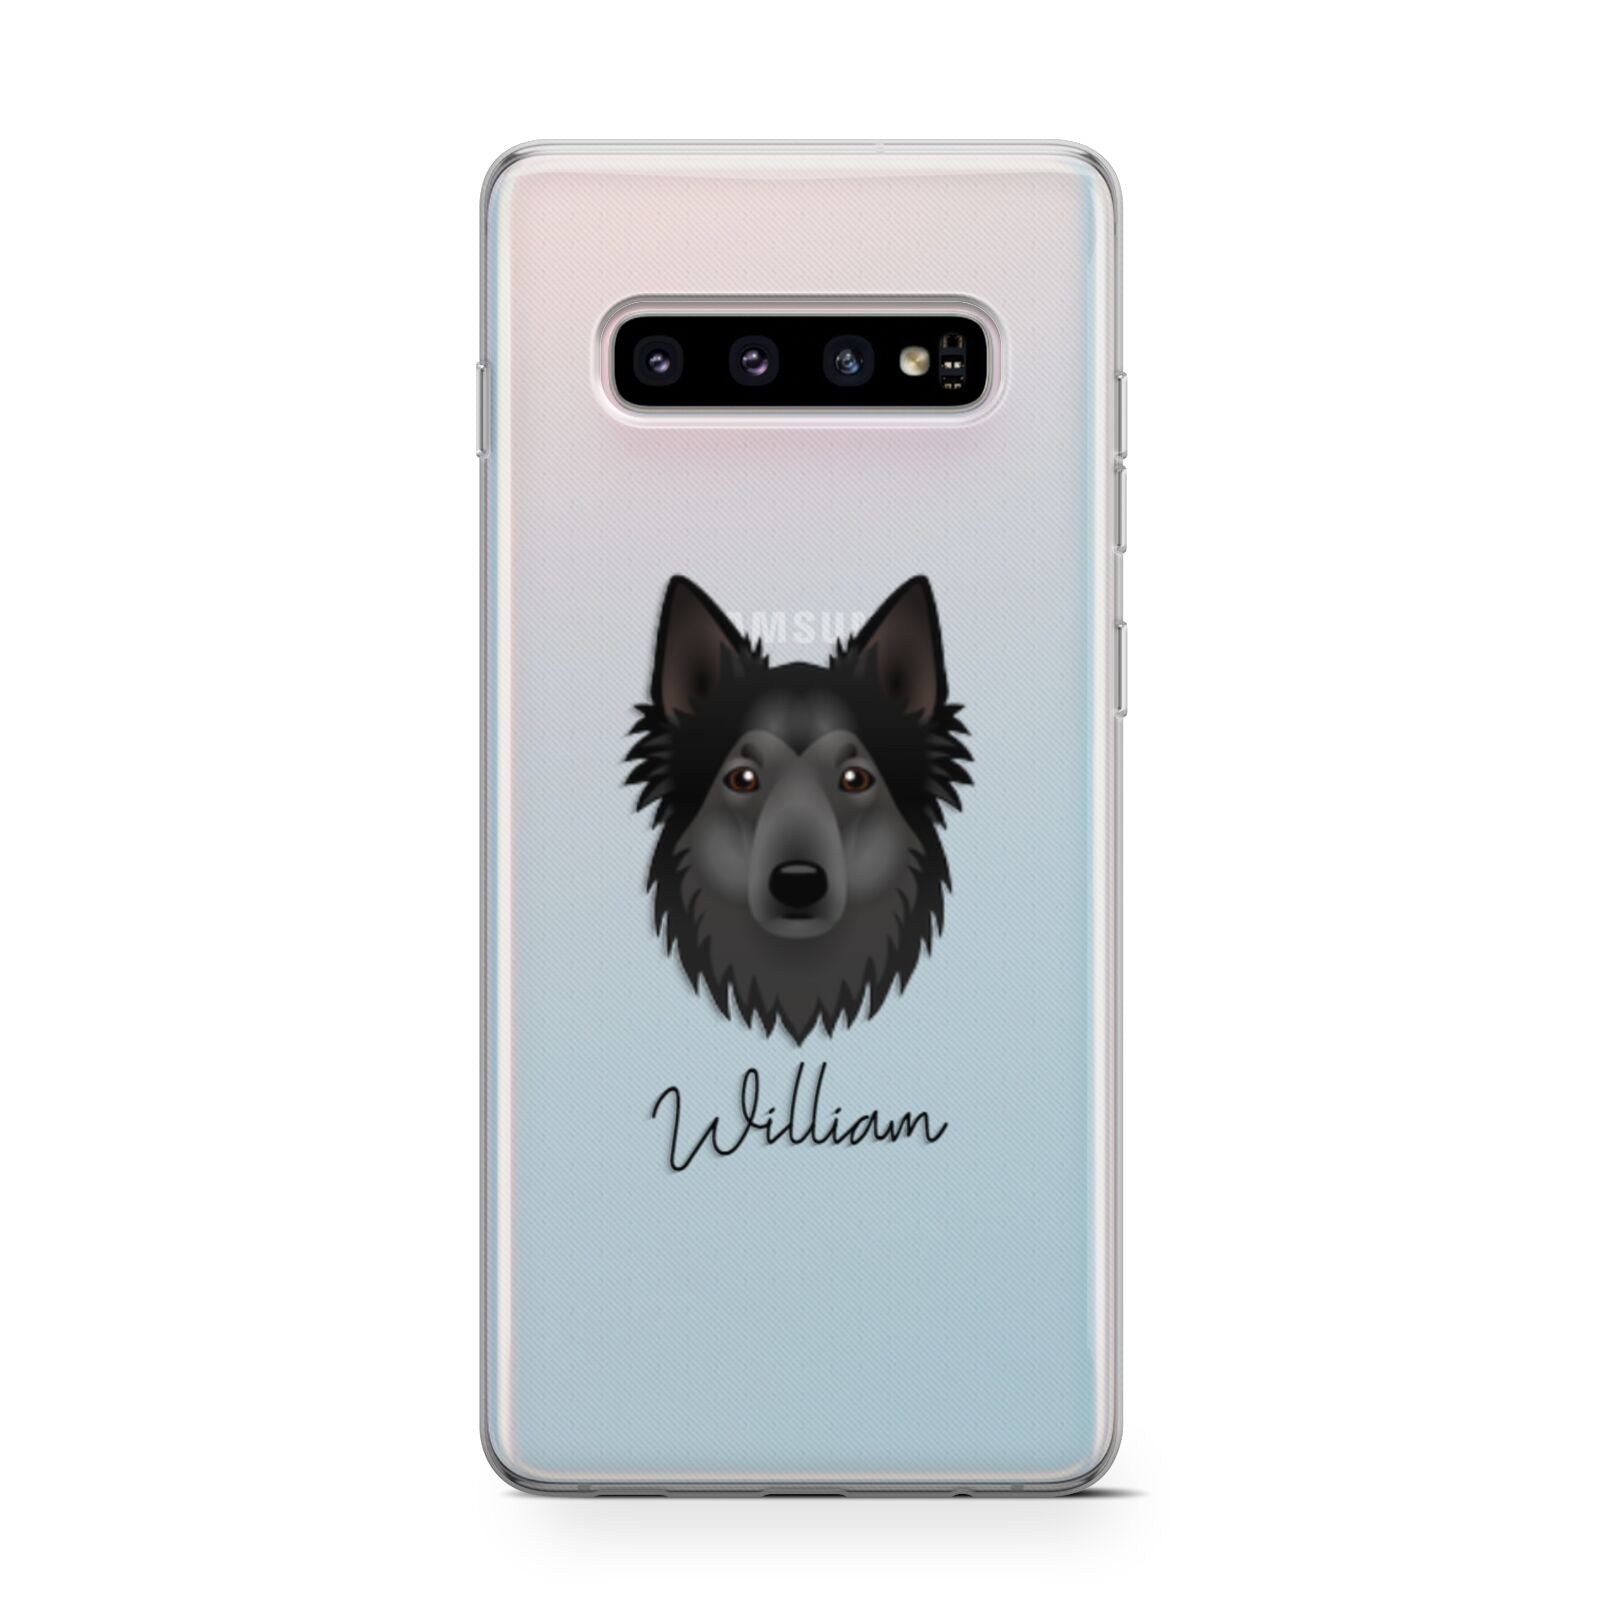 Shollie Personalised Samsung Galaxy S10 Case